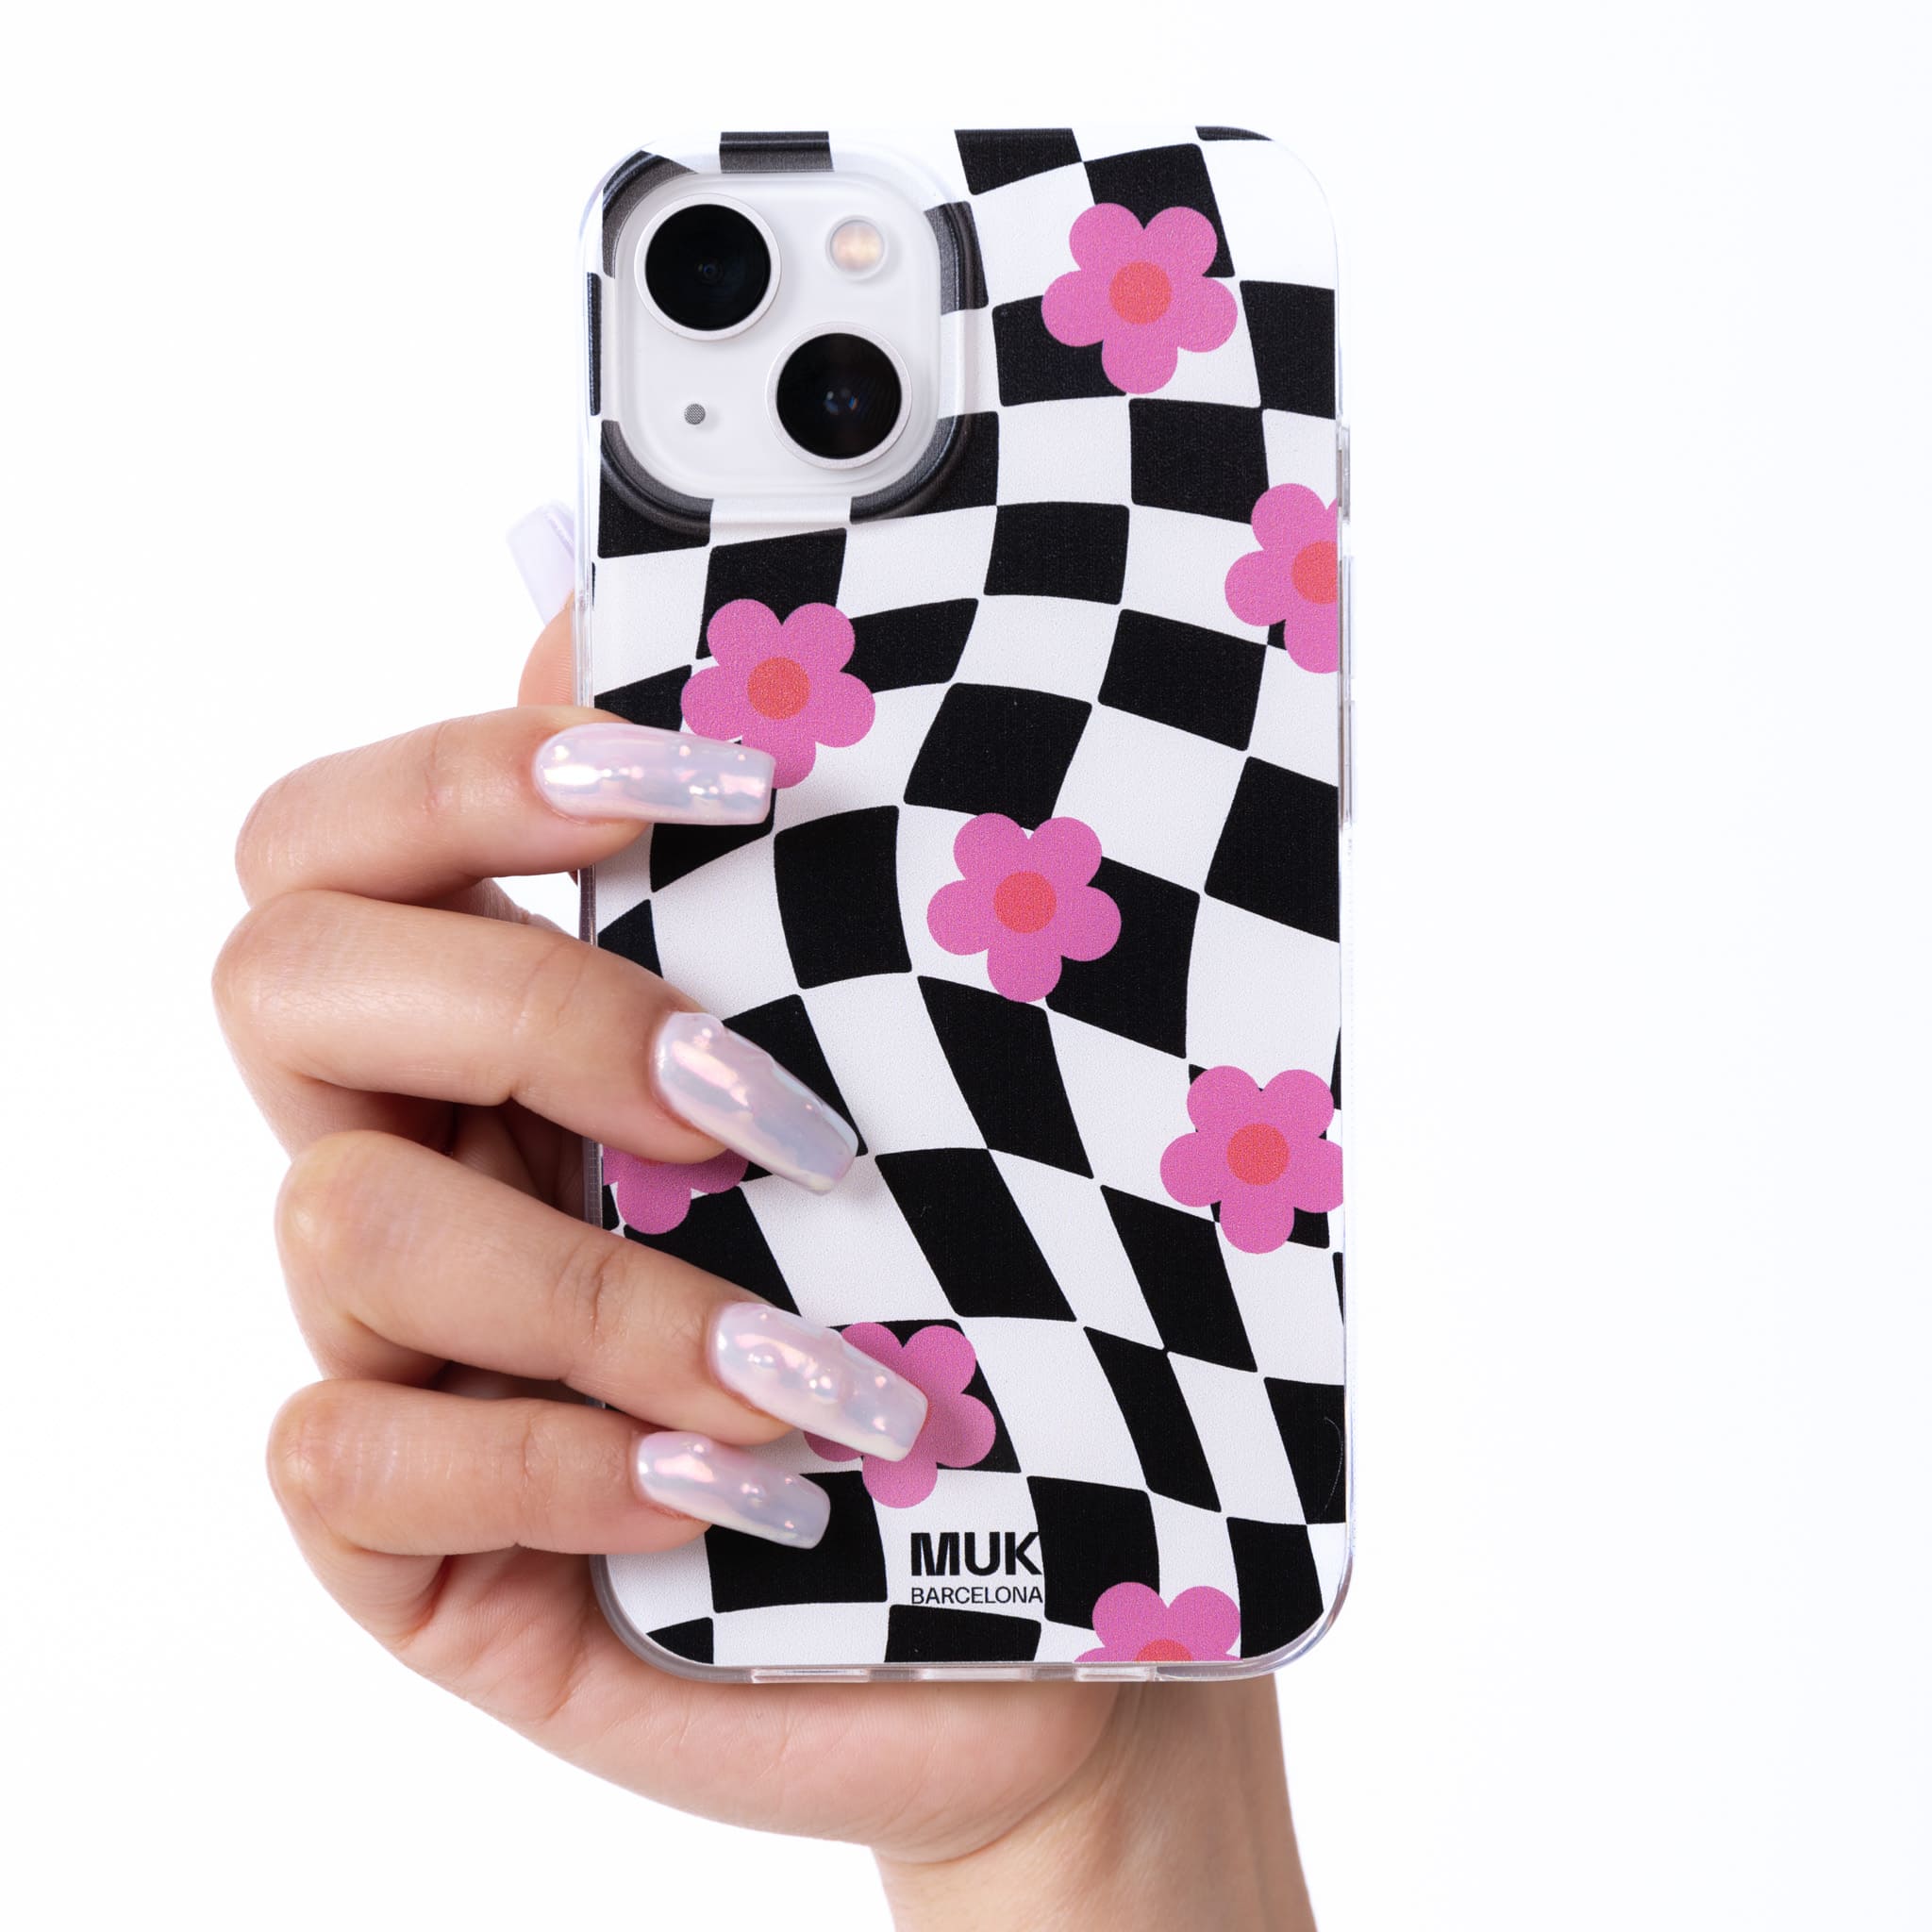 Clear&nbsp;phone case with chess design and pink flowers.
